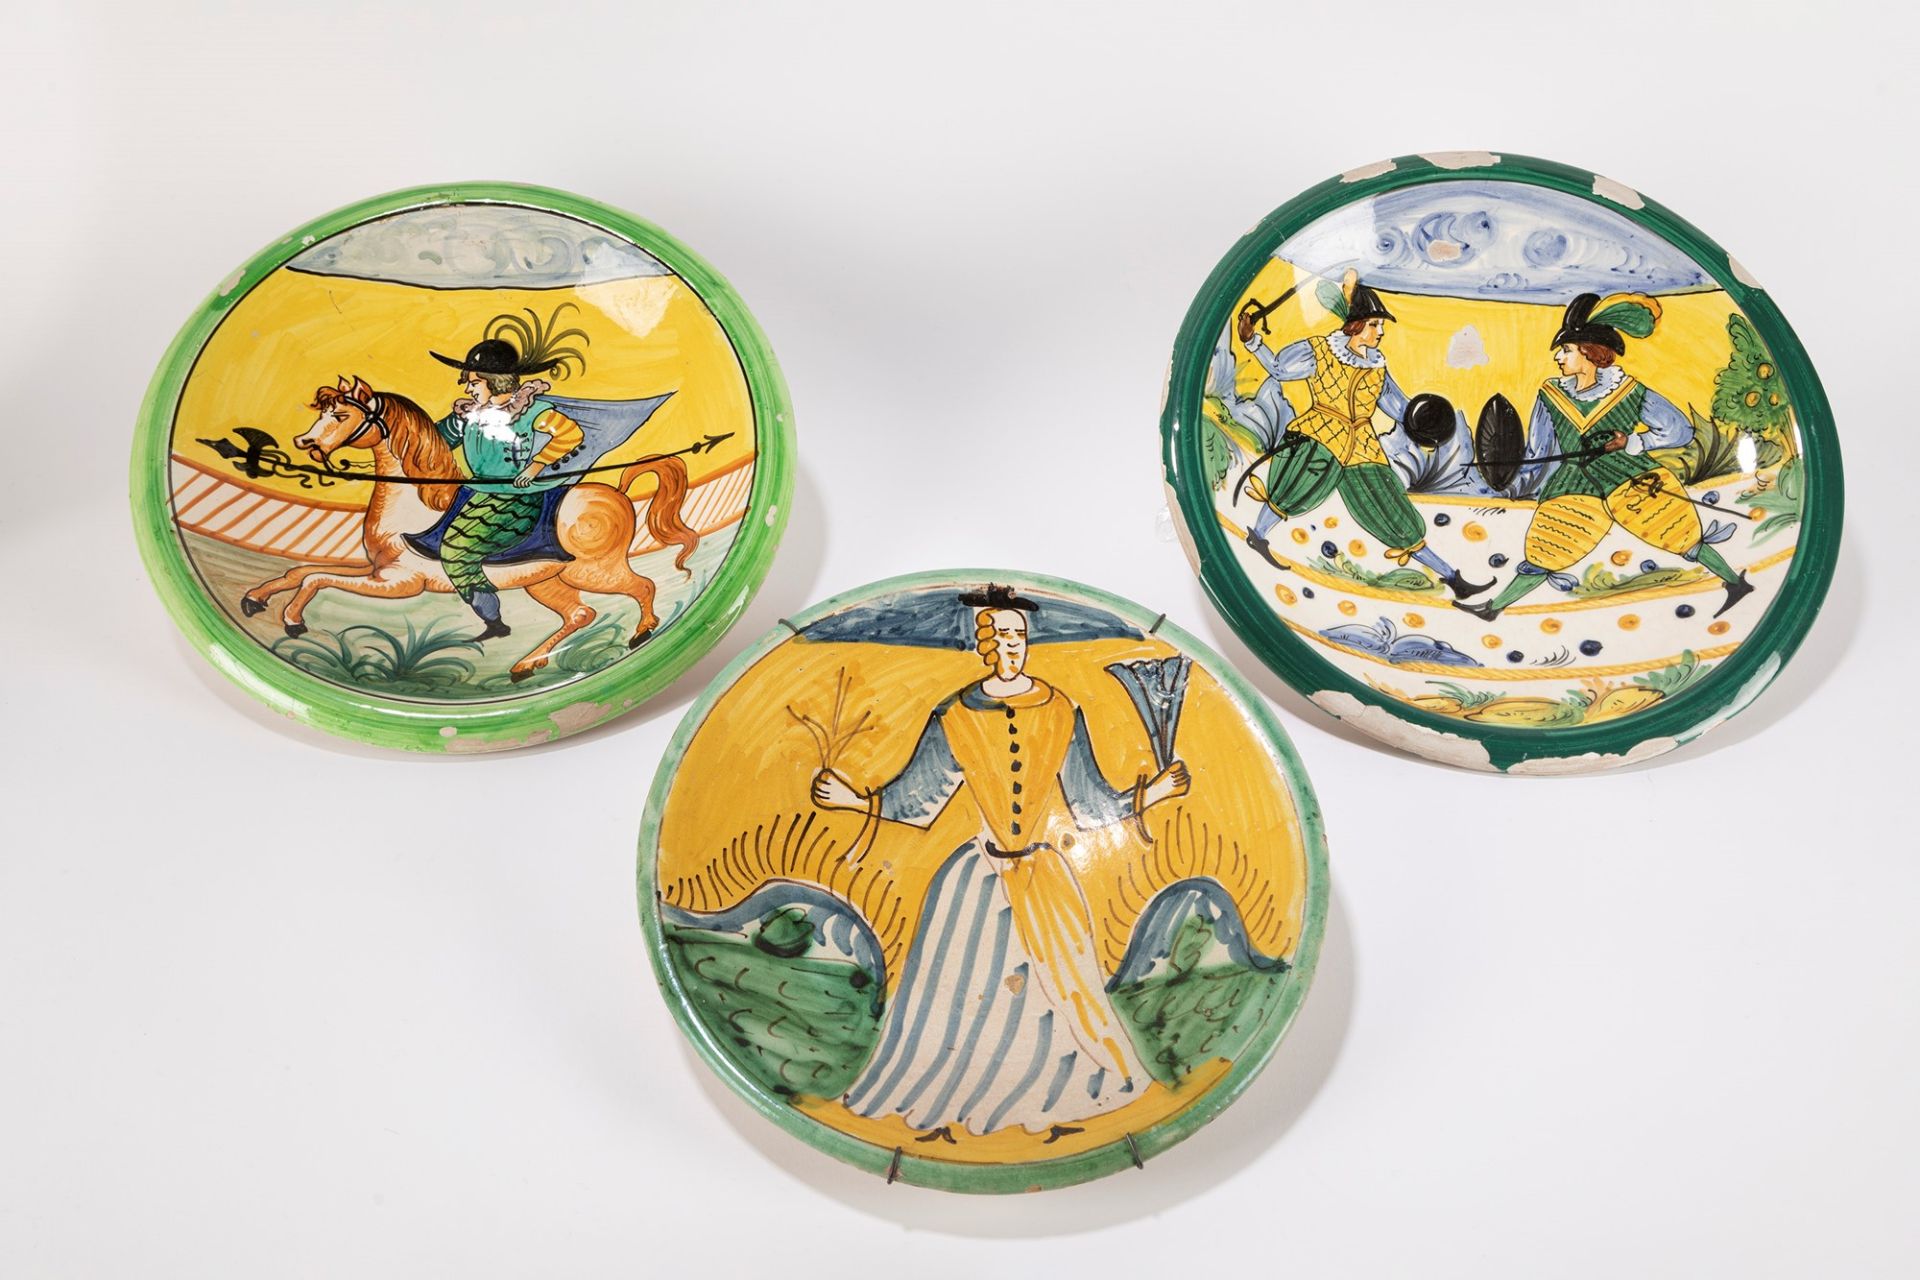 Lot consisting of three plates in polychrome majolica in the Montelupo style